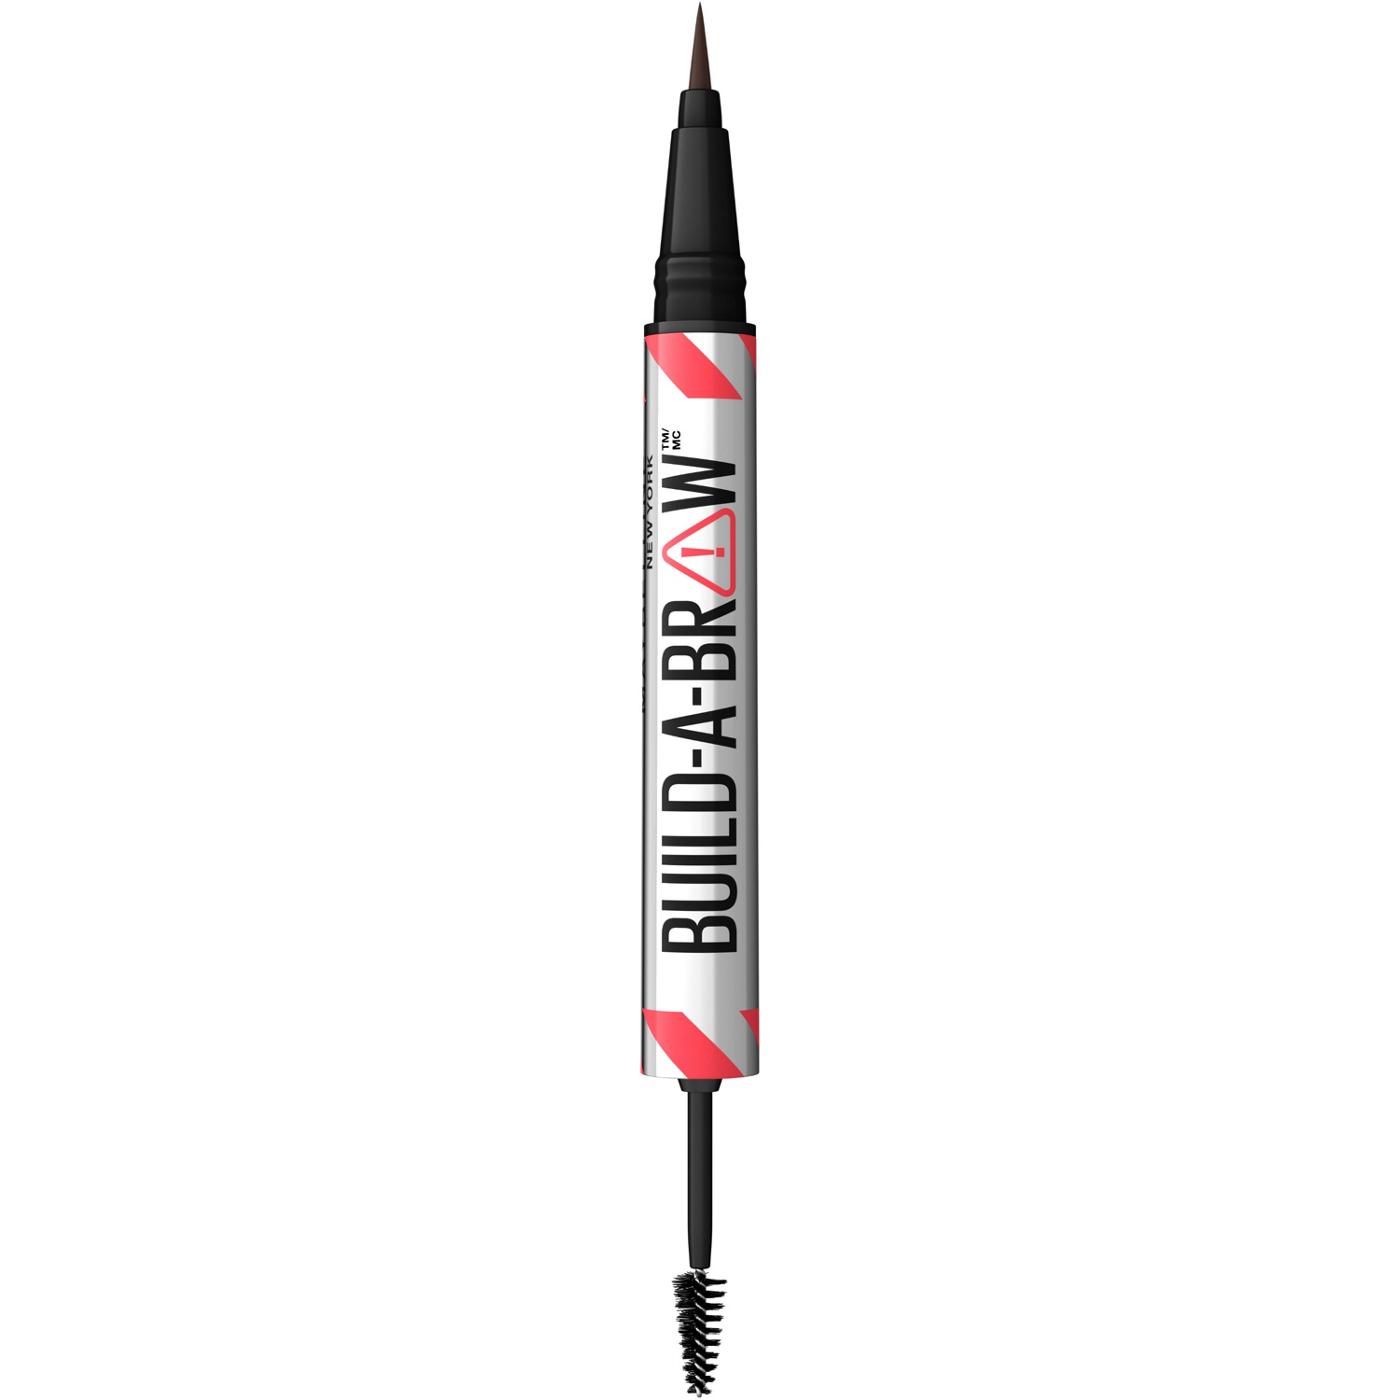 Maybelline Build A Brow 2 In 1 Brow Pen - Deep Brown; image 1 of 17